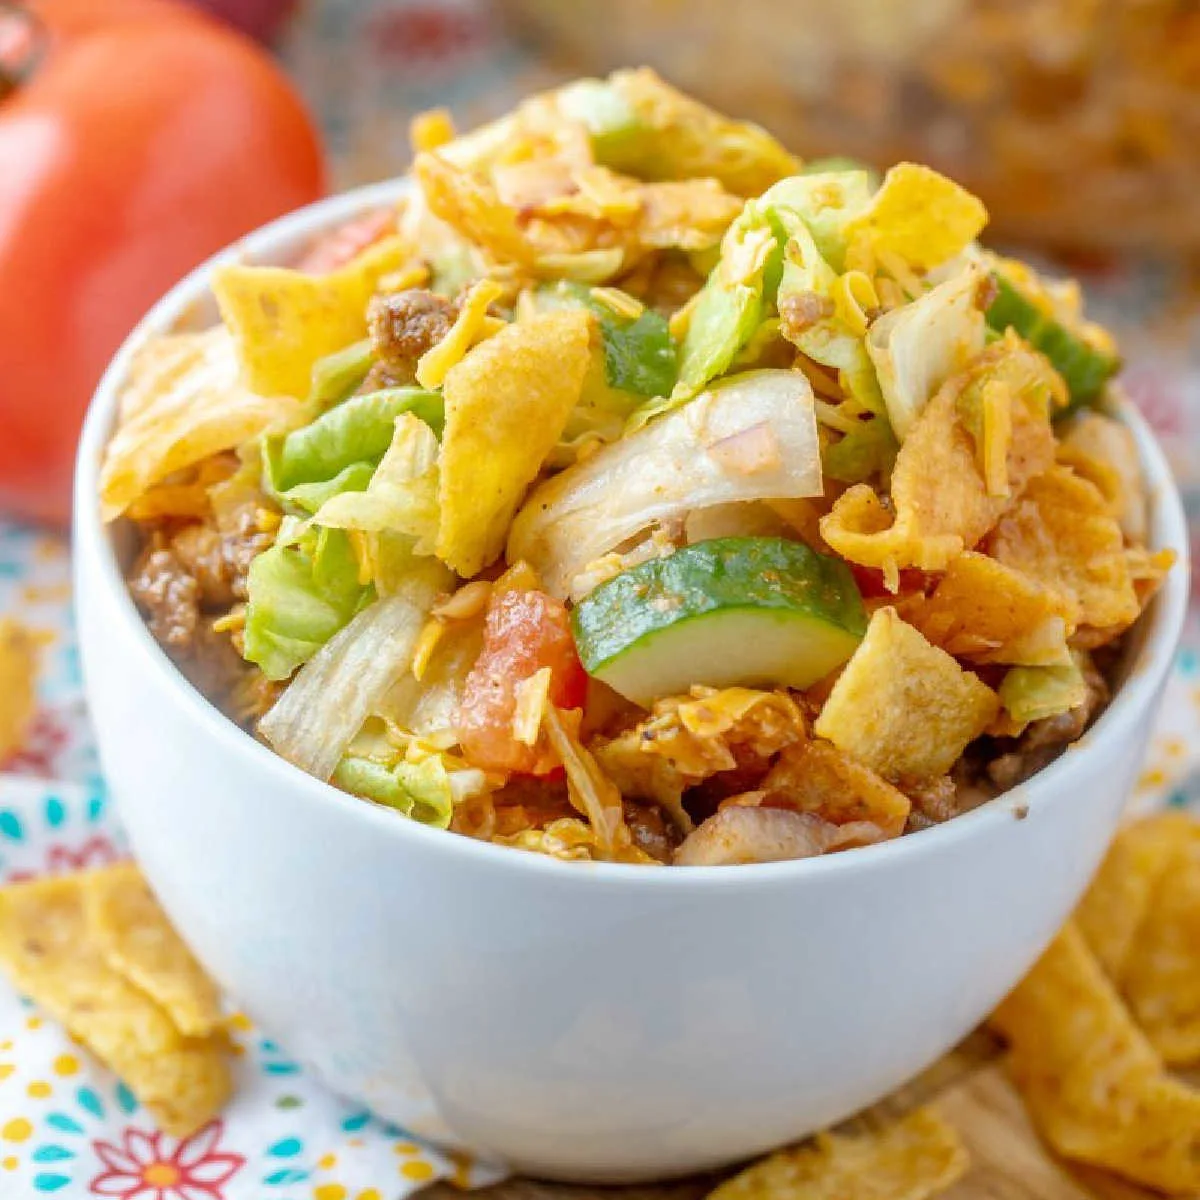 Close bowl of frito salad showing lettuce, cucumbers, cheese, taco meat and fritos all tossed in homemade catalina dressing.